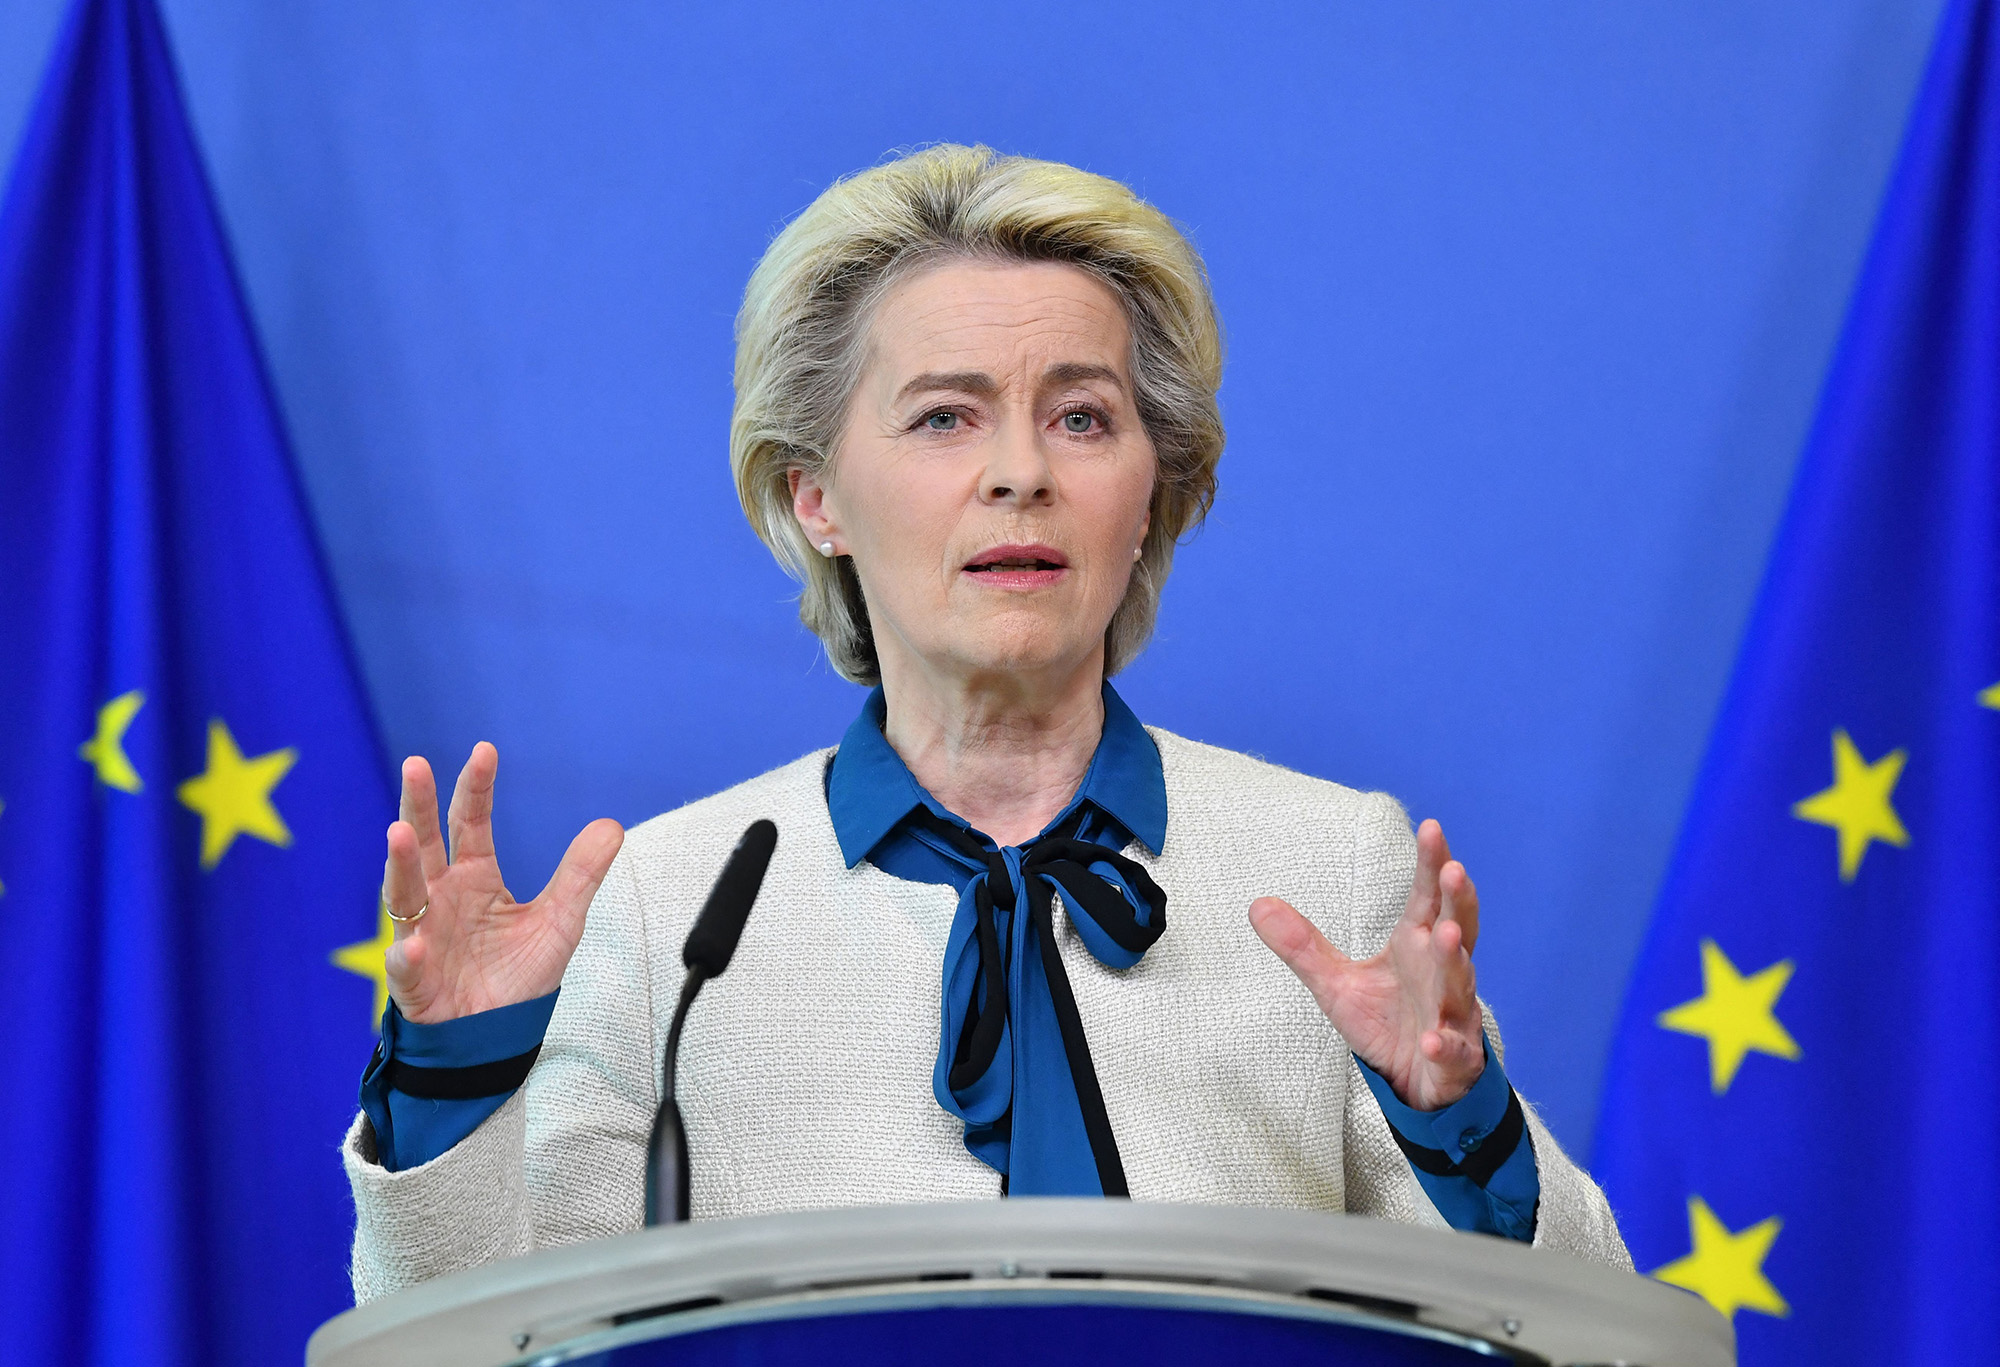 European Commission President Ursula von der Leyen delivers a statement at the EU headquarters in Brussels, Belgium, on May 18.